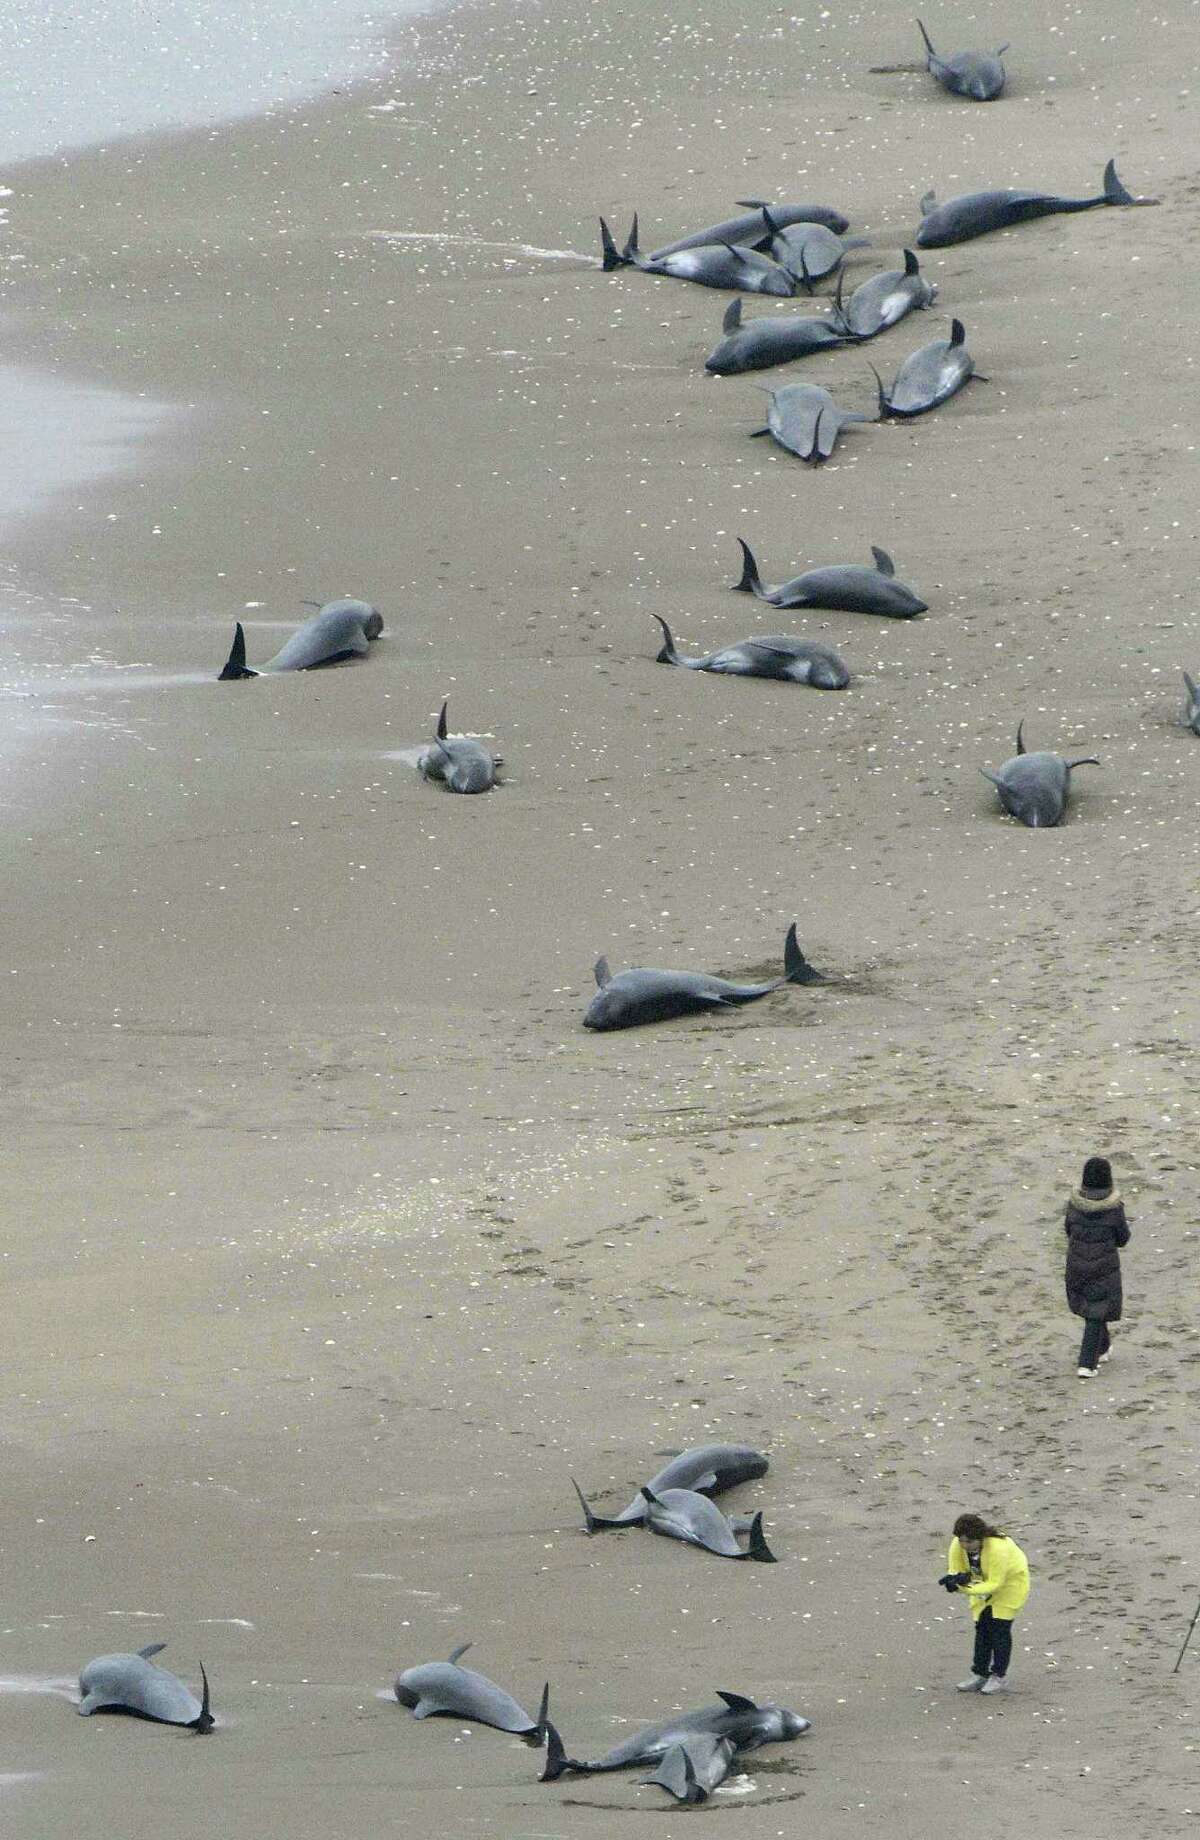 Dolphins lie on the beach in Hokota, north of Tokyo, Friday, April 10, 2015. Nearly 150 dolphins were found washed ashore the coast in central Japan on Friday morning. A Hokota city official said a total of 149 dolphins were found stranded on the beach by noon local time.